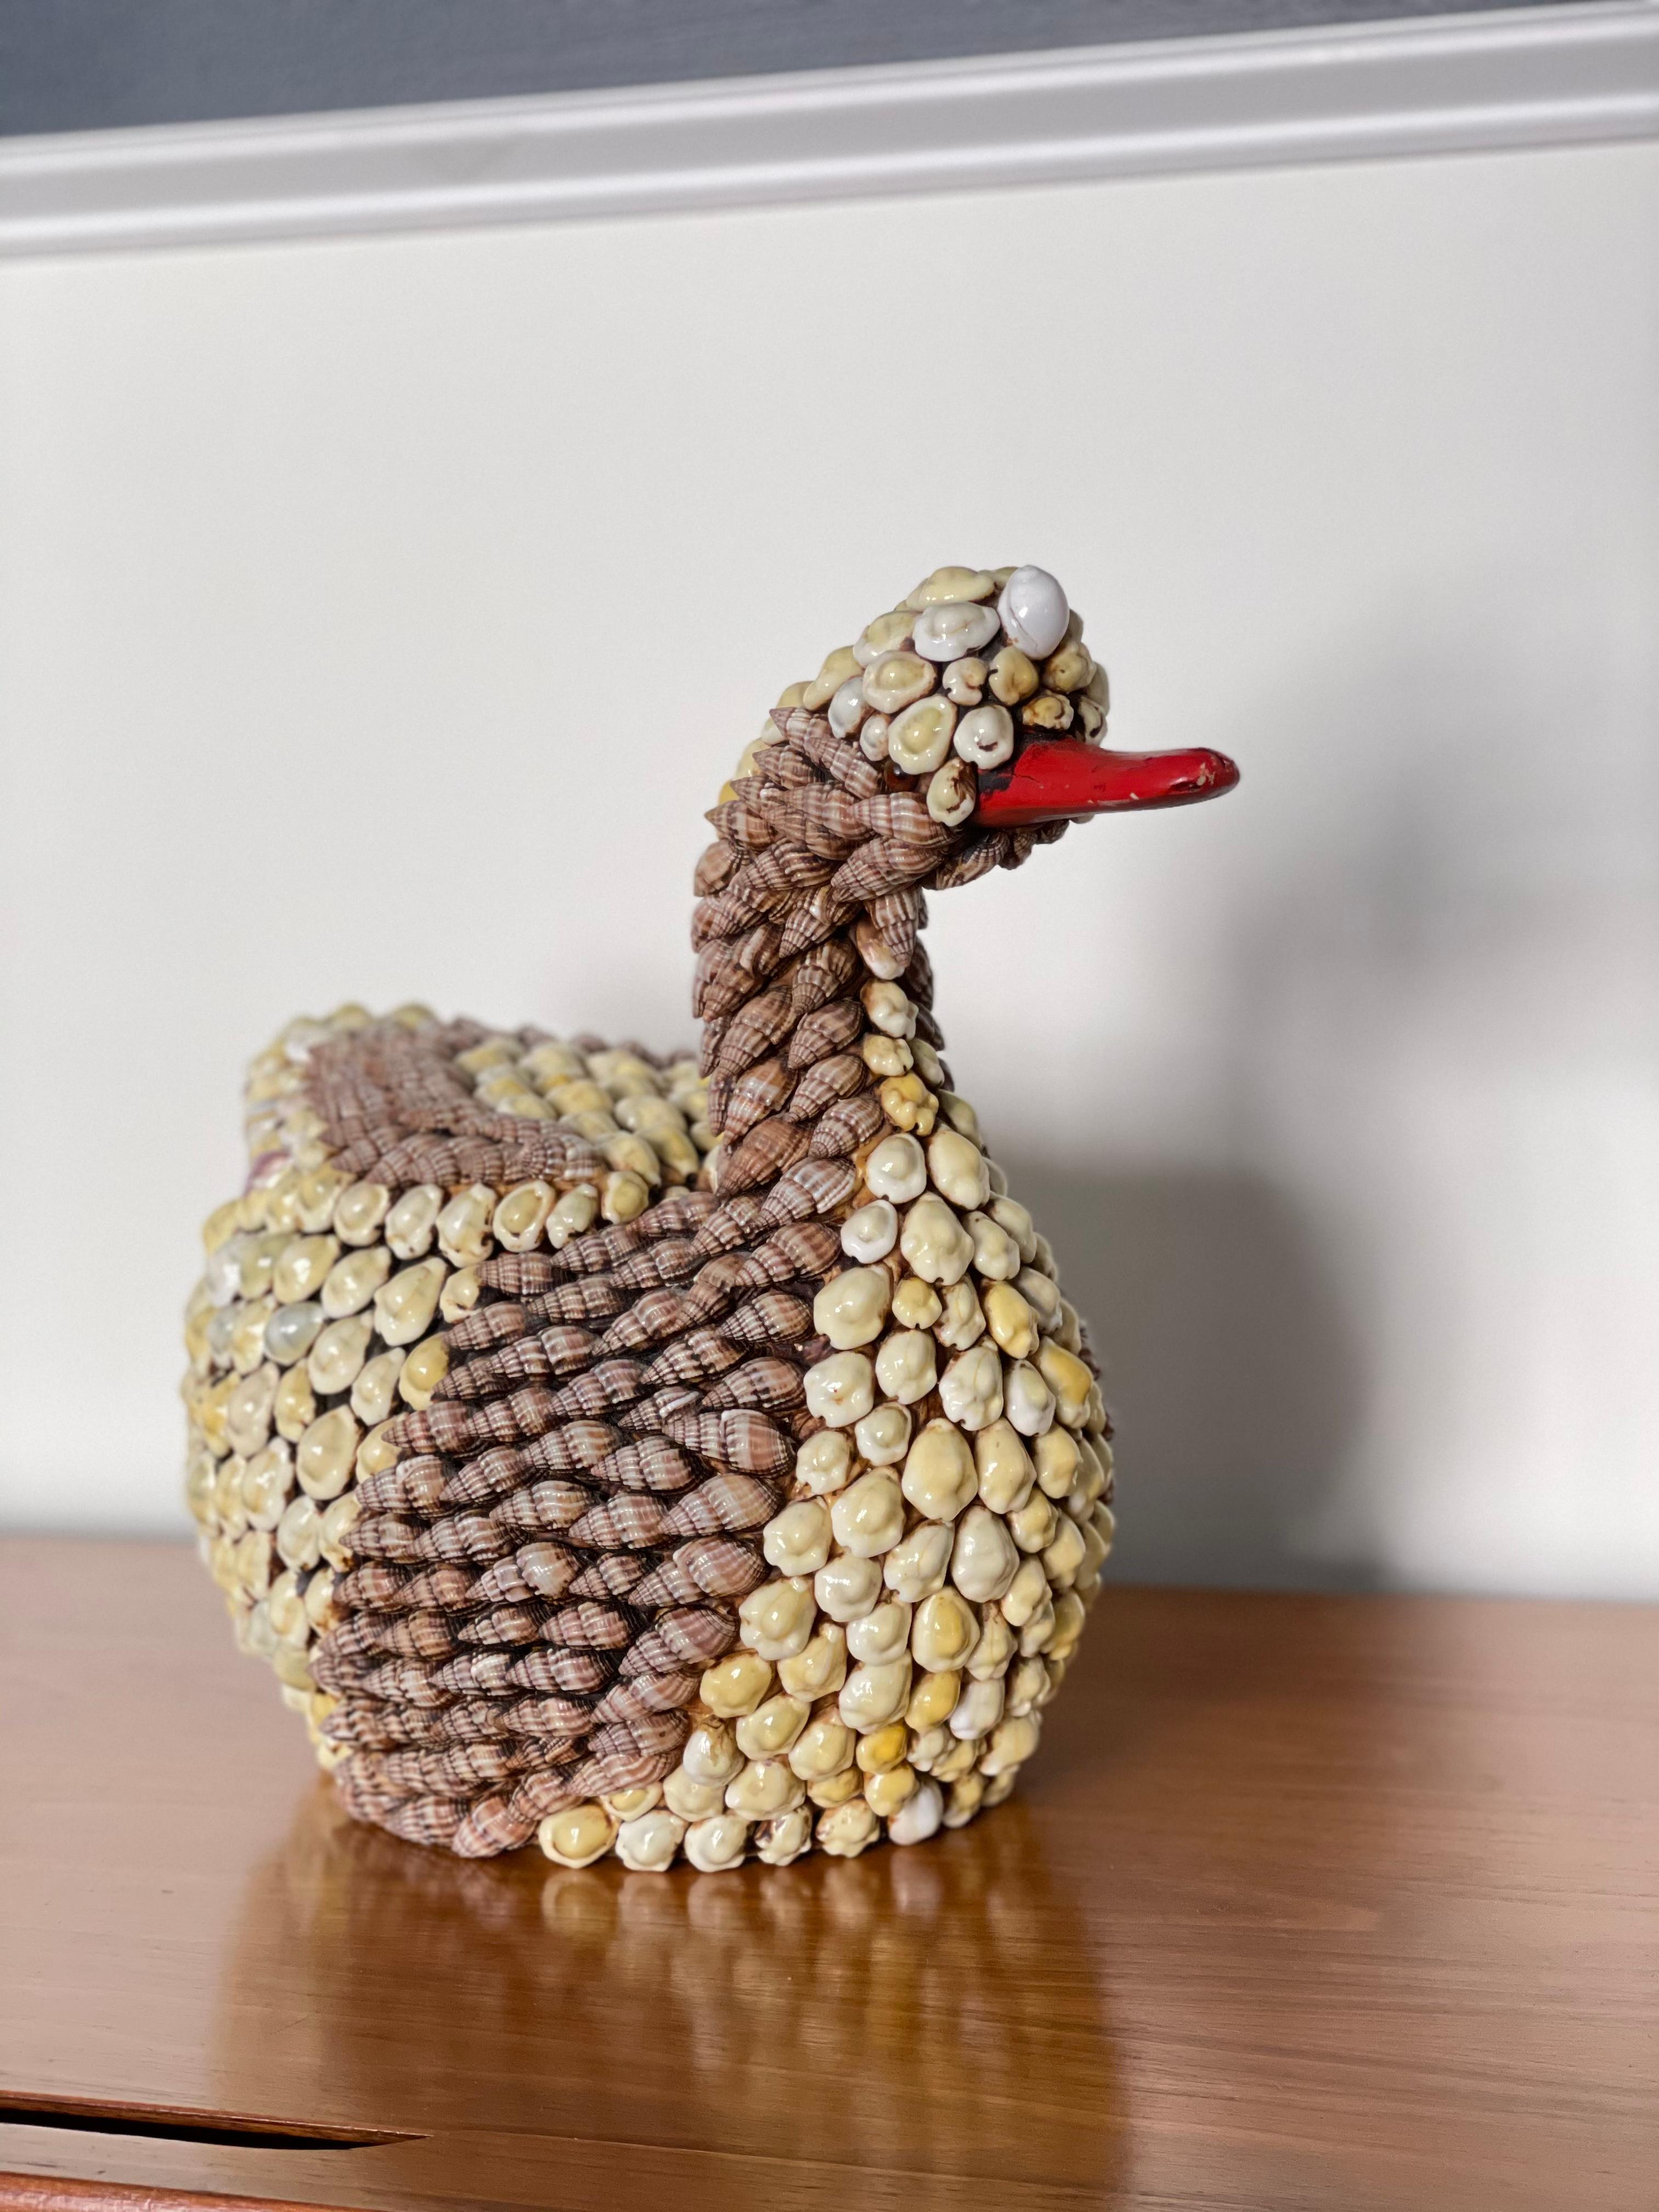 Anthony Redmile Shell Encrusted Duck or Swan Box Redmile Objects London England For Sale 1